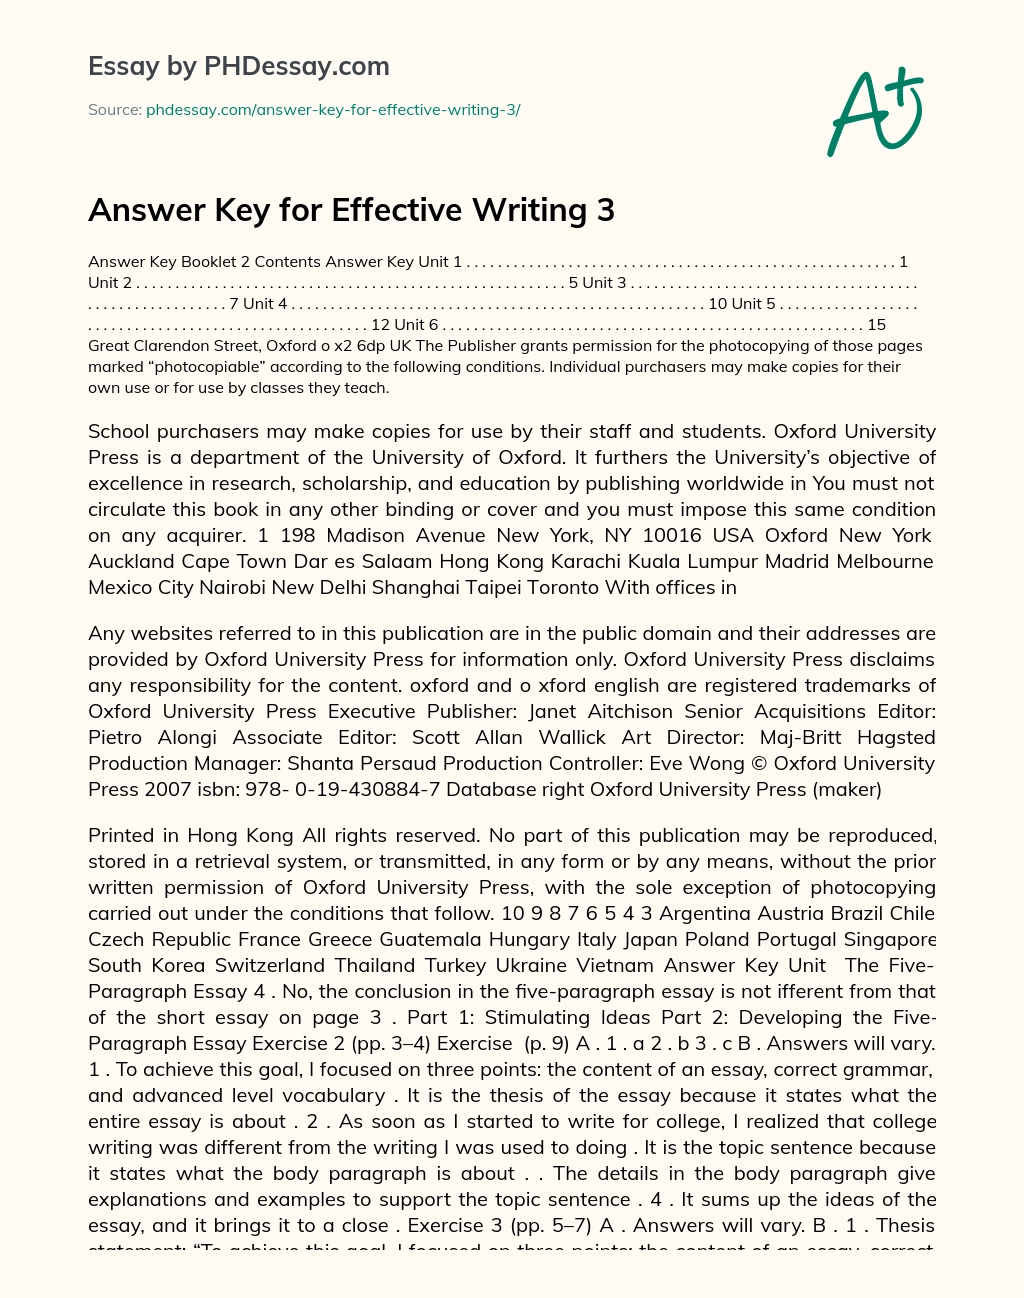 Answer Key for Effective Writing 3 essay